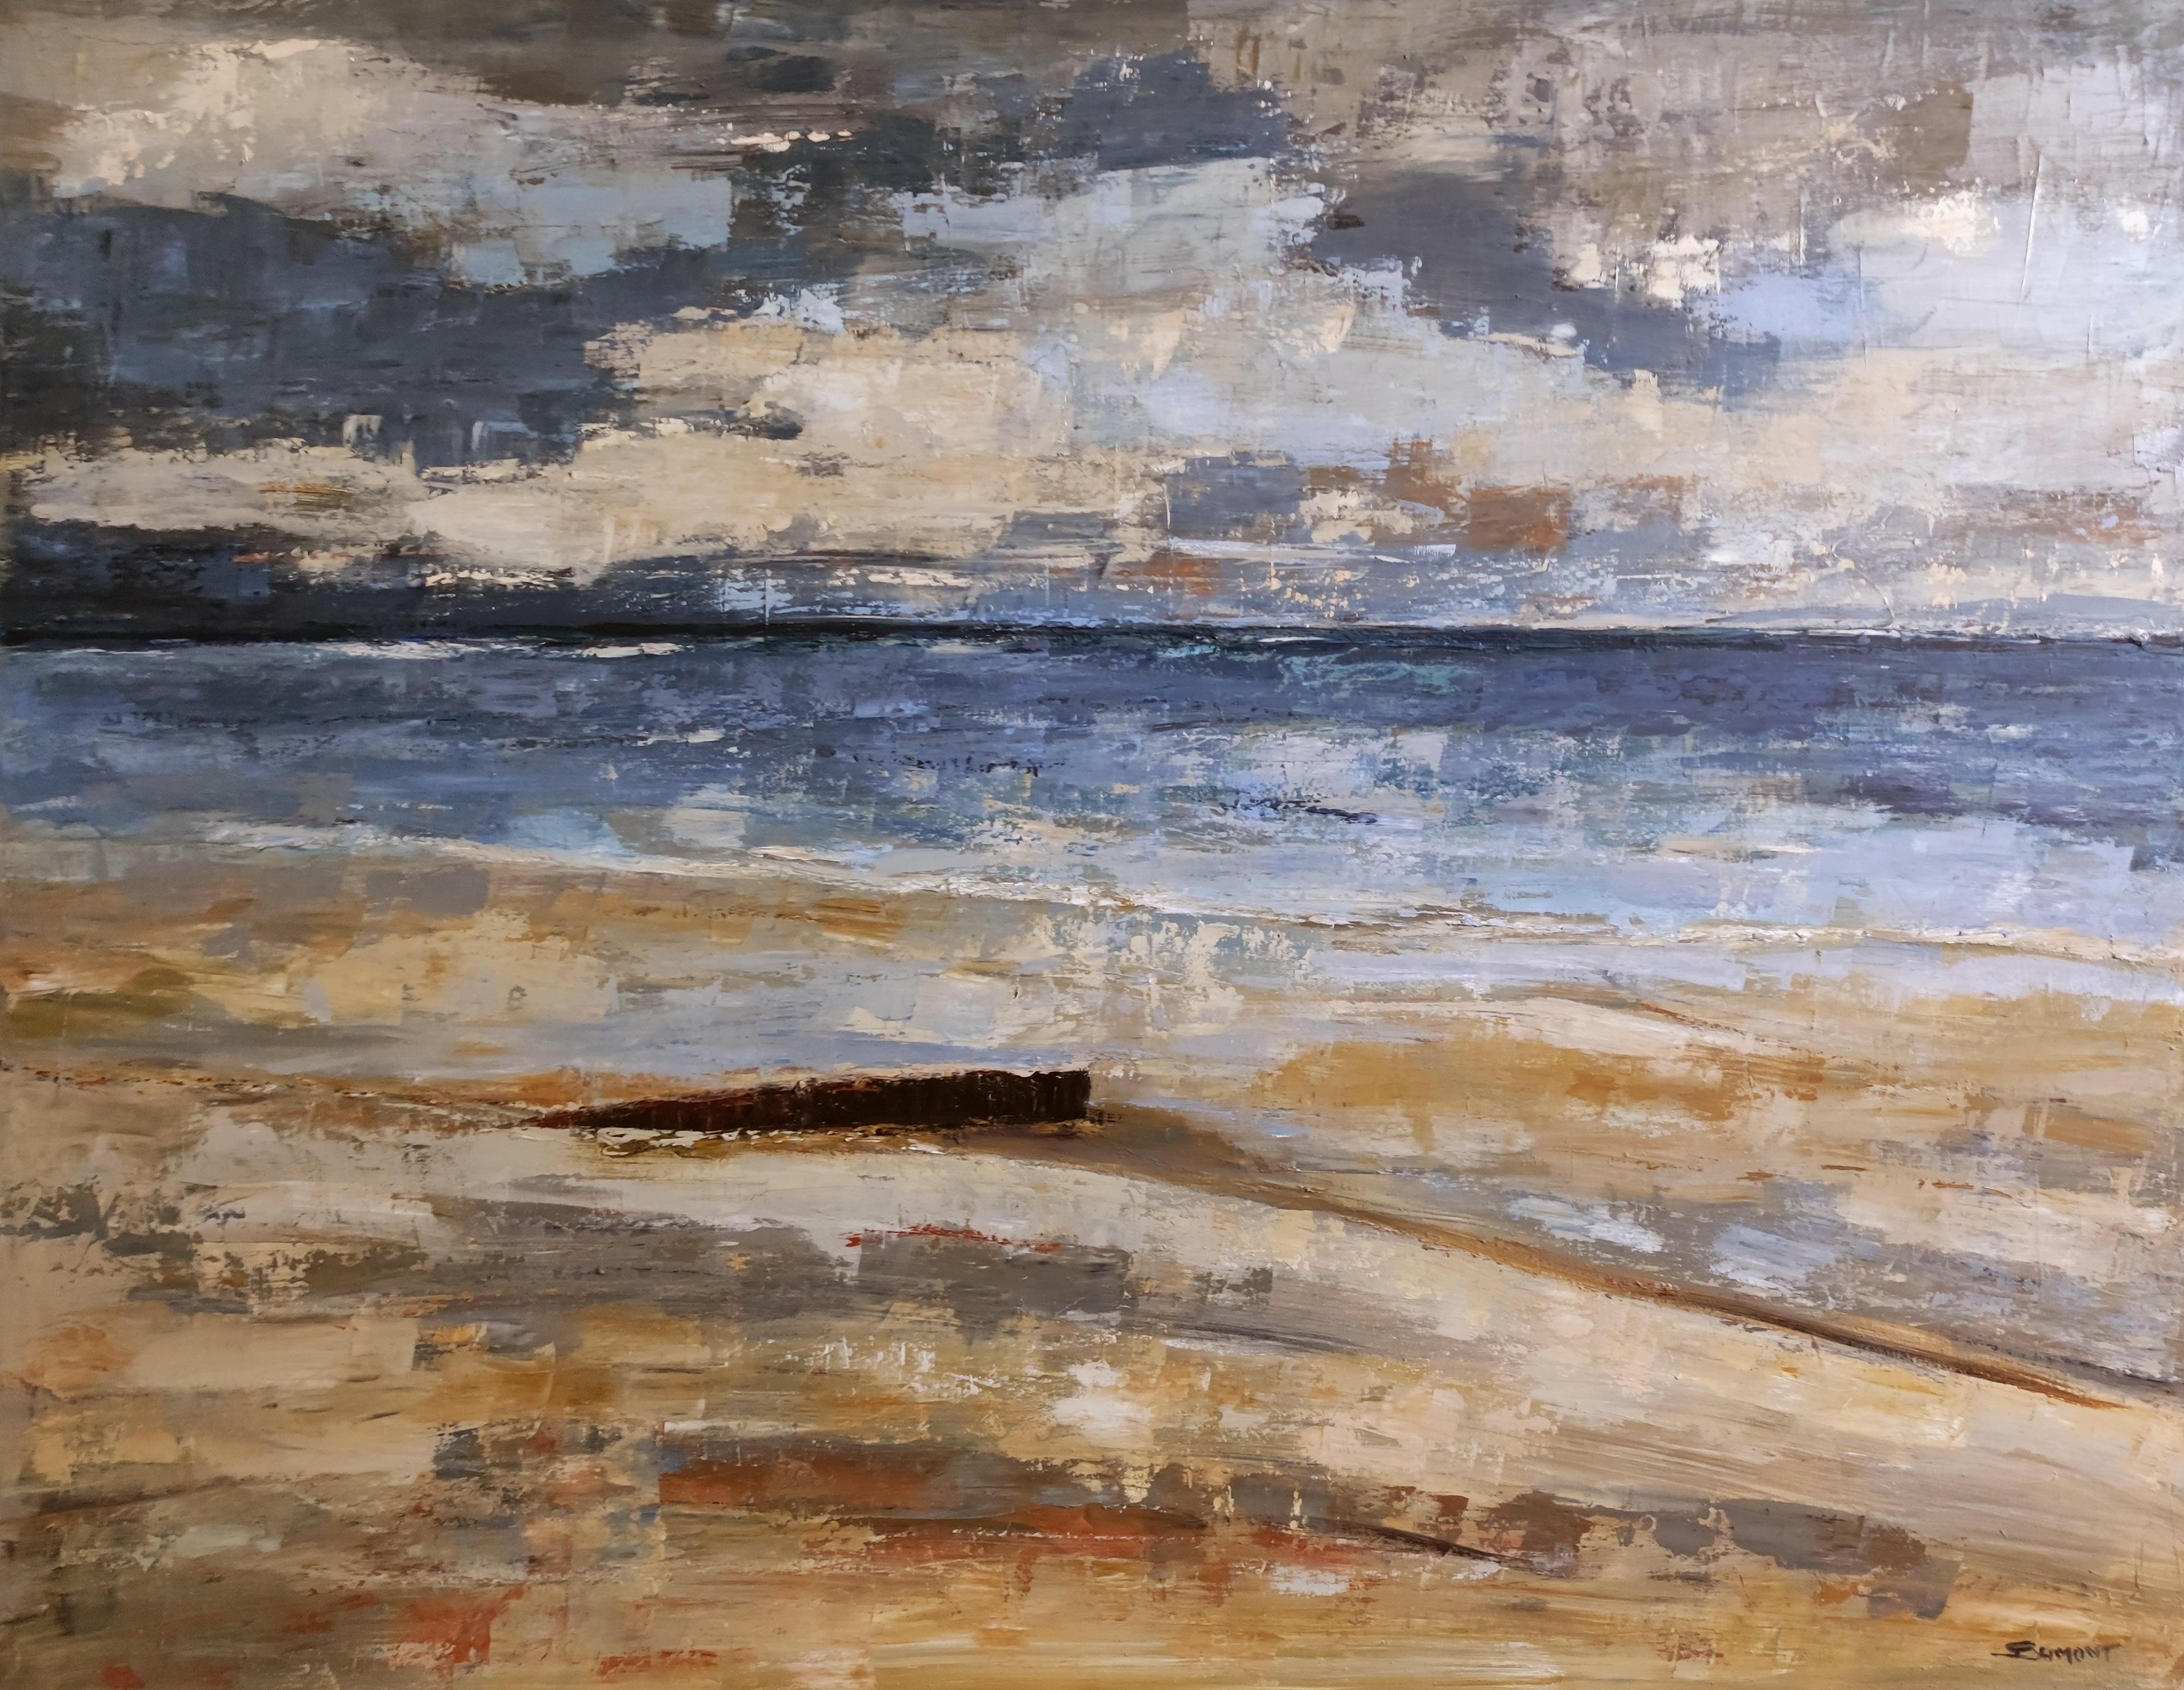 SOPHIE DUMONT Abstract Painting - beach, seaside, semi-abstract, oil on canvas, texture, impasto, France